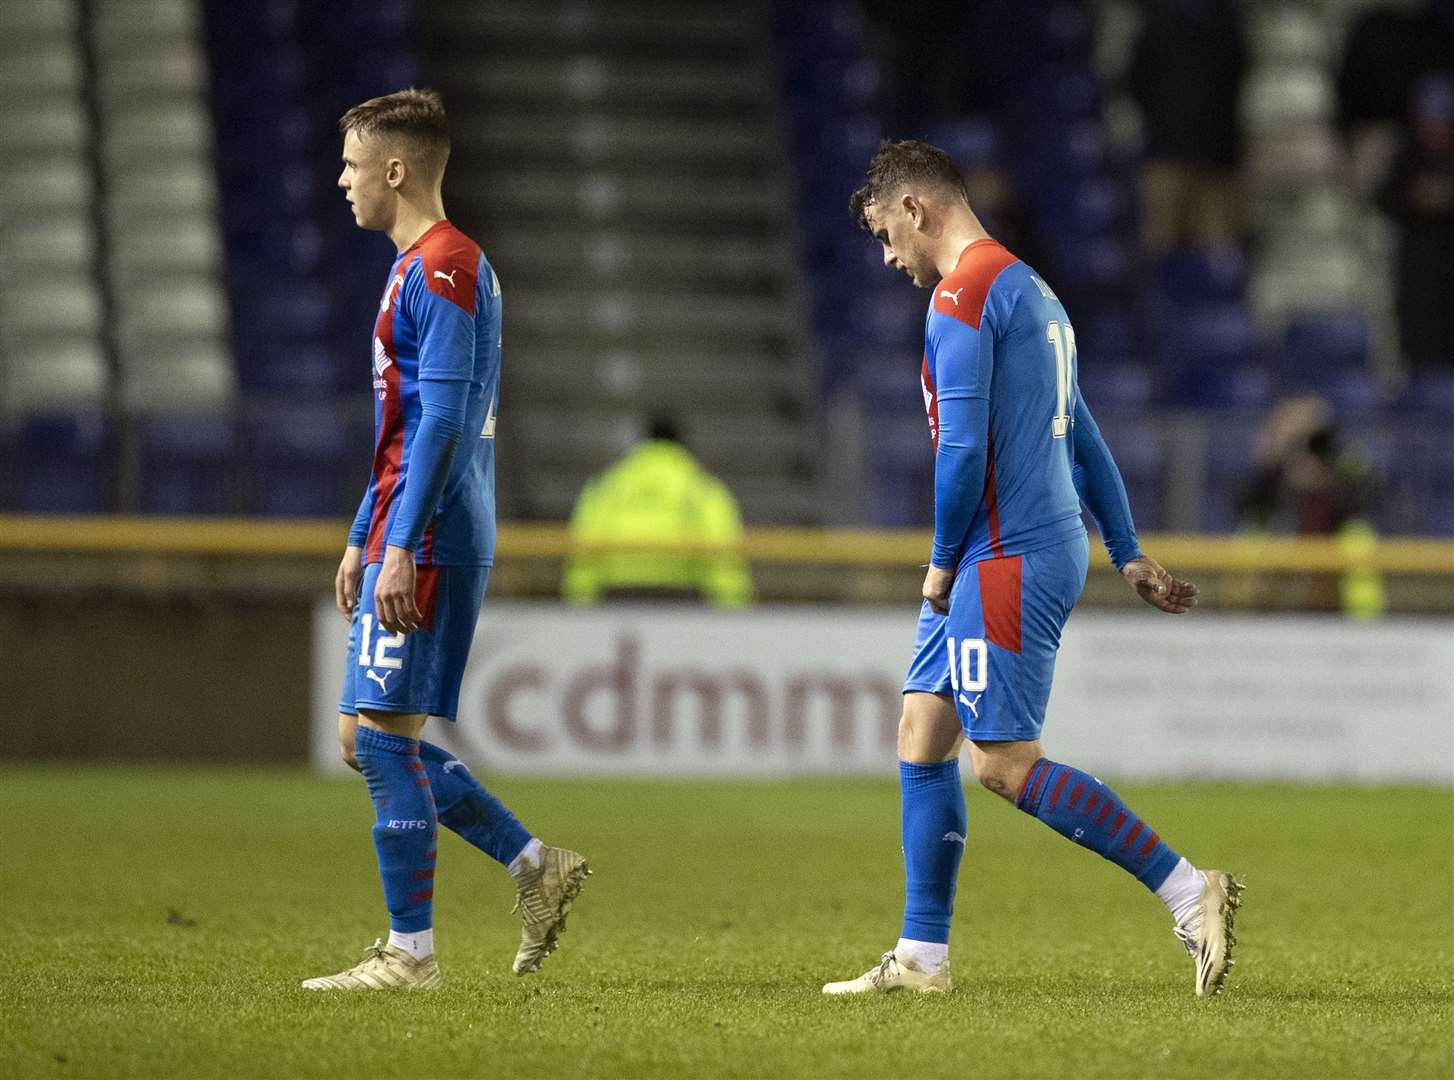 Picture - Ken Macpherson, Inverness. Inverness CT(2) v Dundee(2). 12.12.20. ICT’s Roddy MacGregor and Aaron Doran are disappointed at the end.